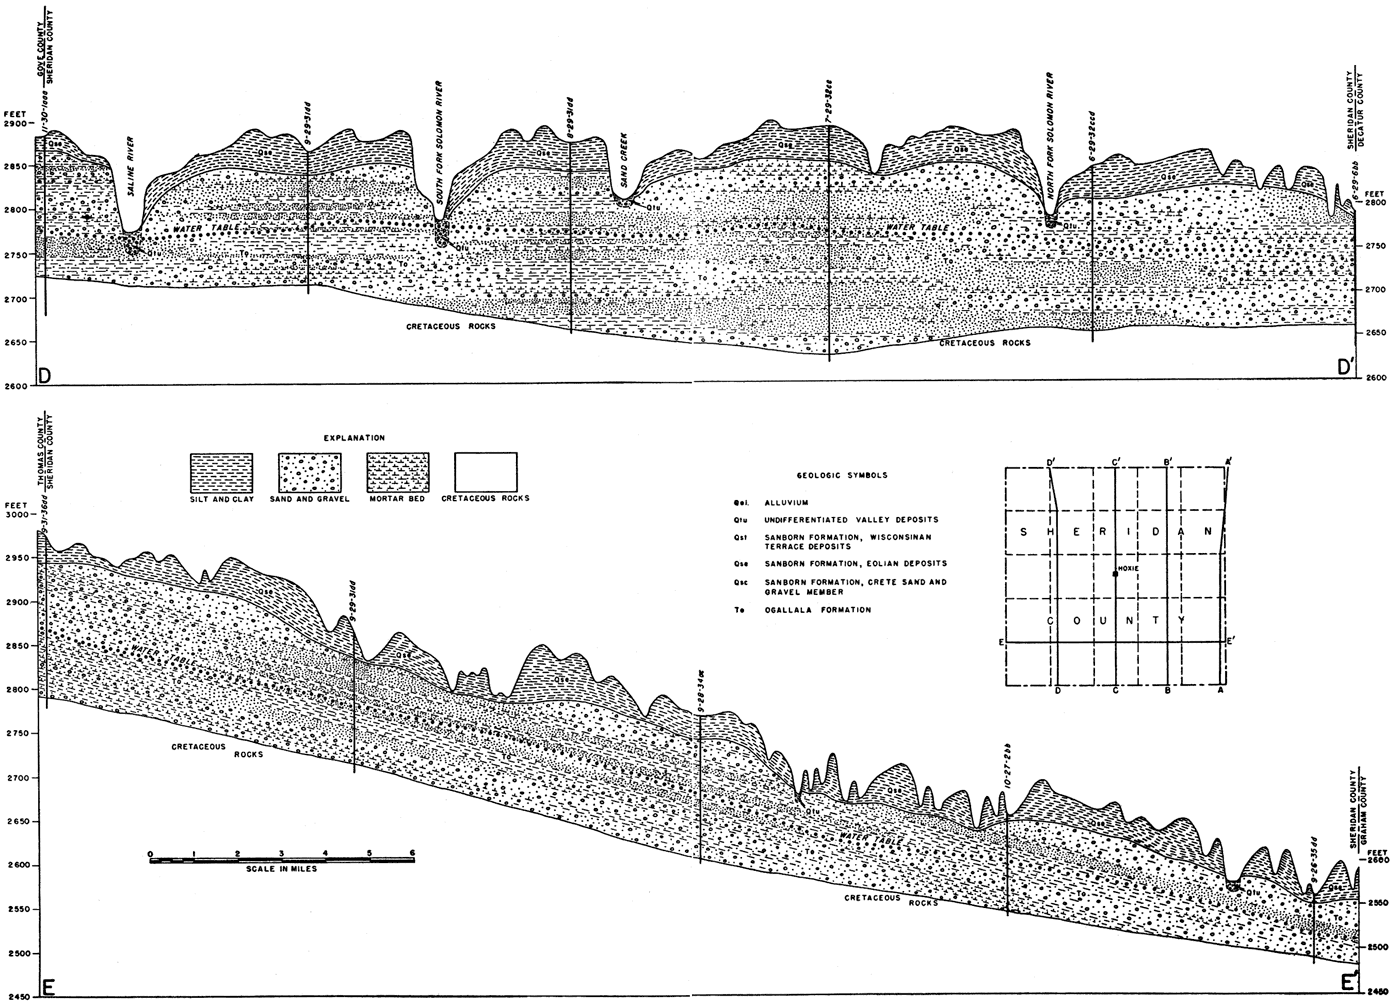 Two cross sections and an index map